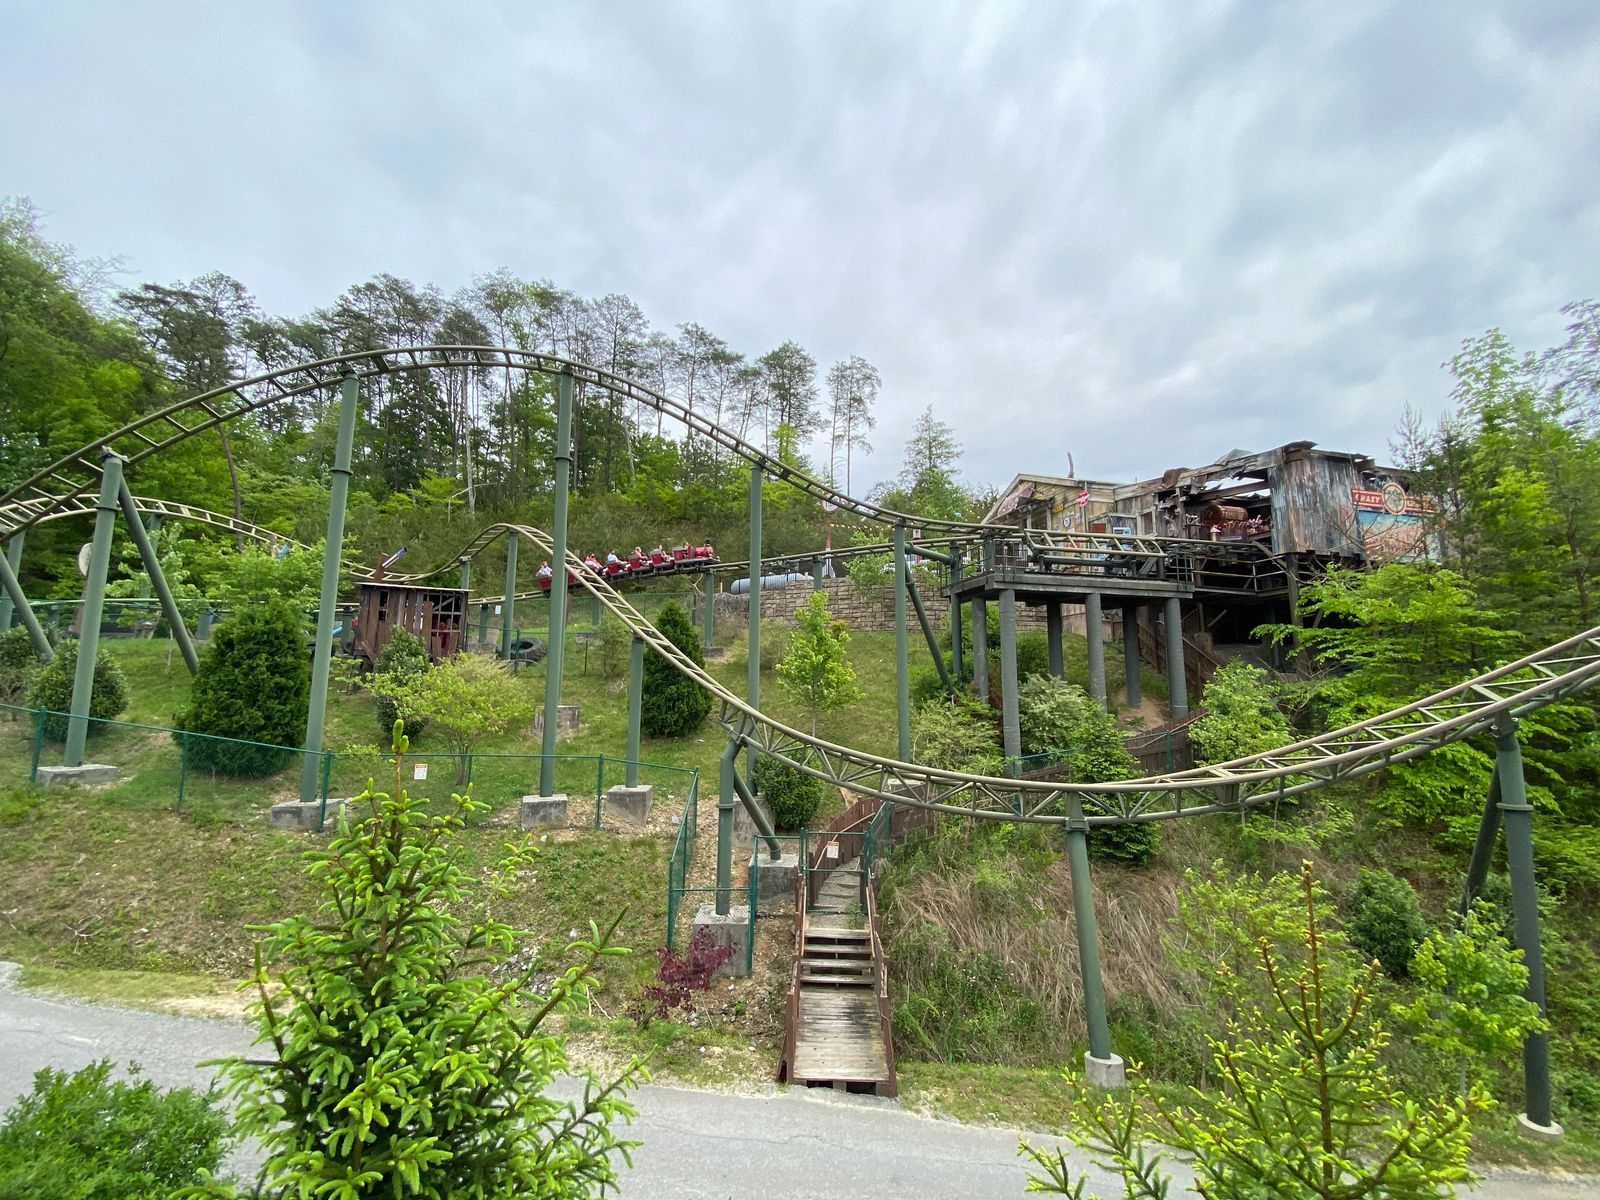 Guide To Dollywood, fire chaser rollercoaster with red carts going backwards along the track